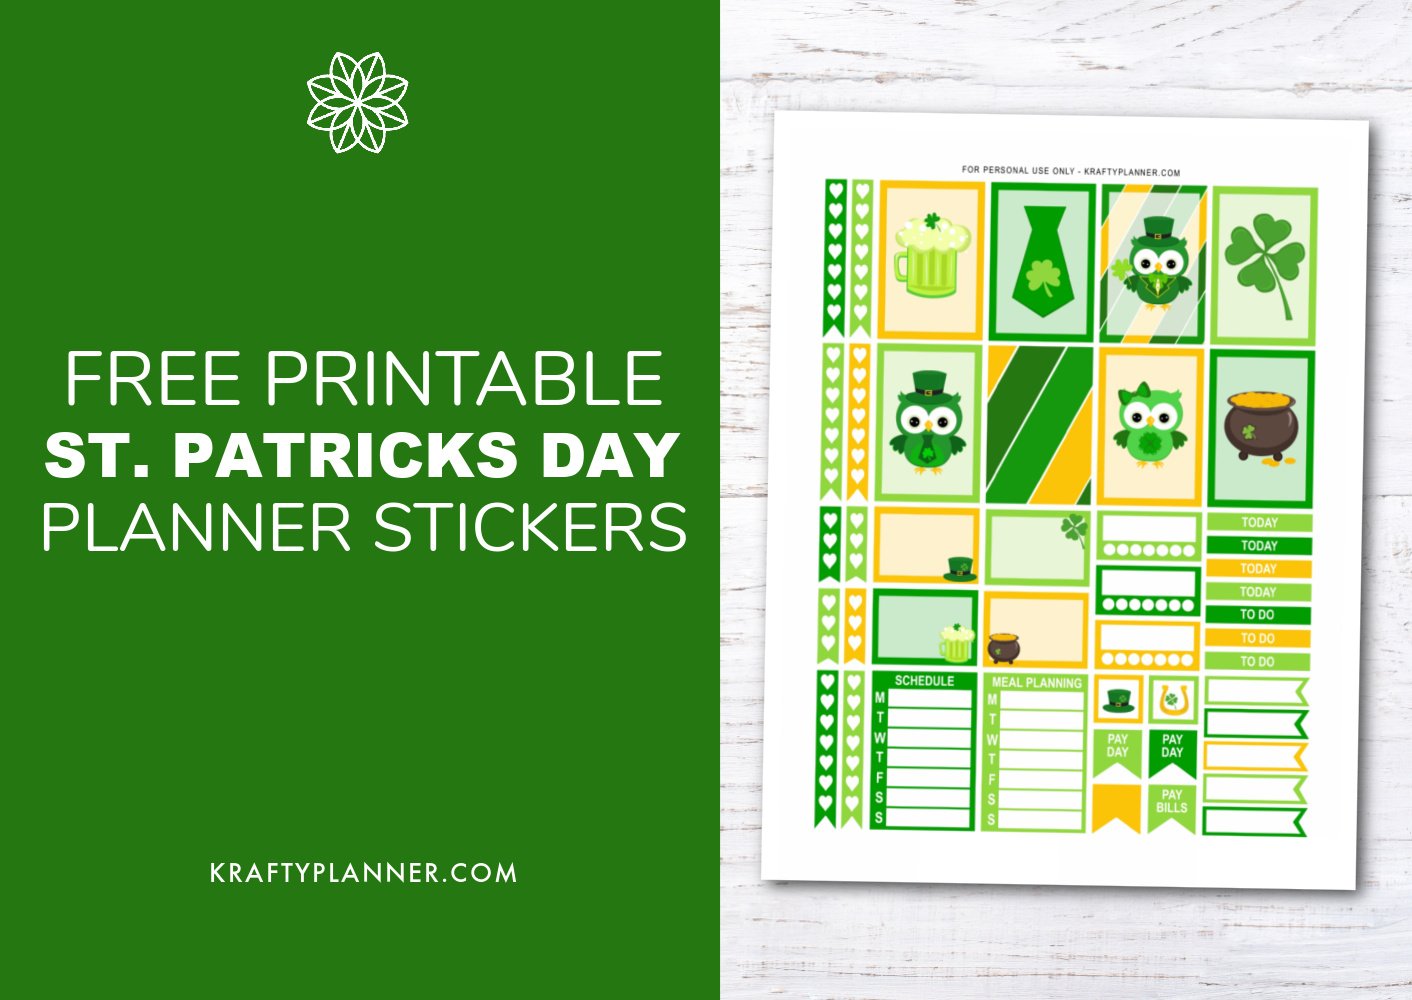 Free Printable St. Patrick's Day Planner Stickers